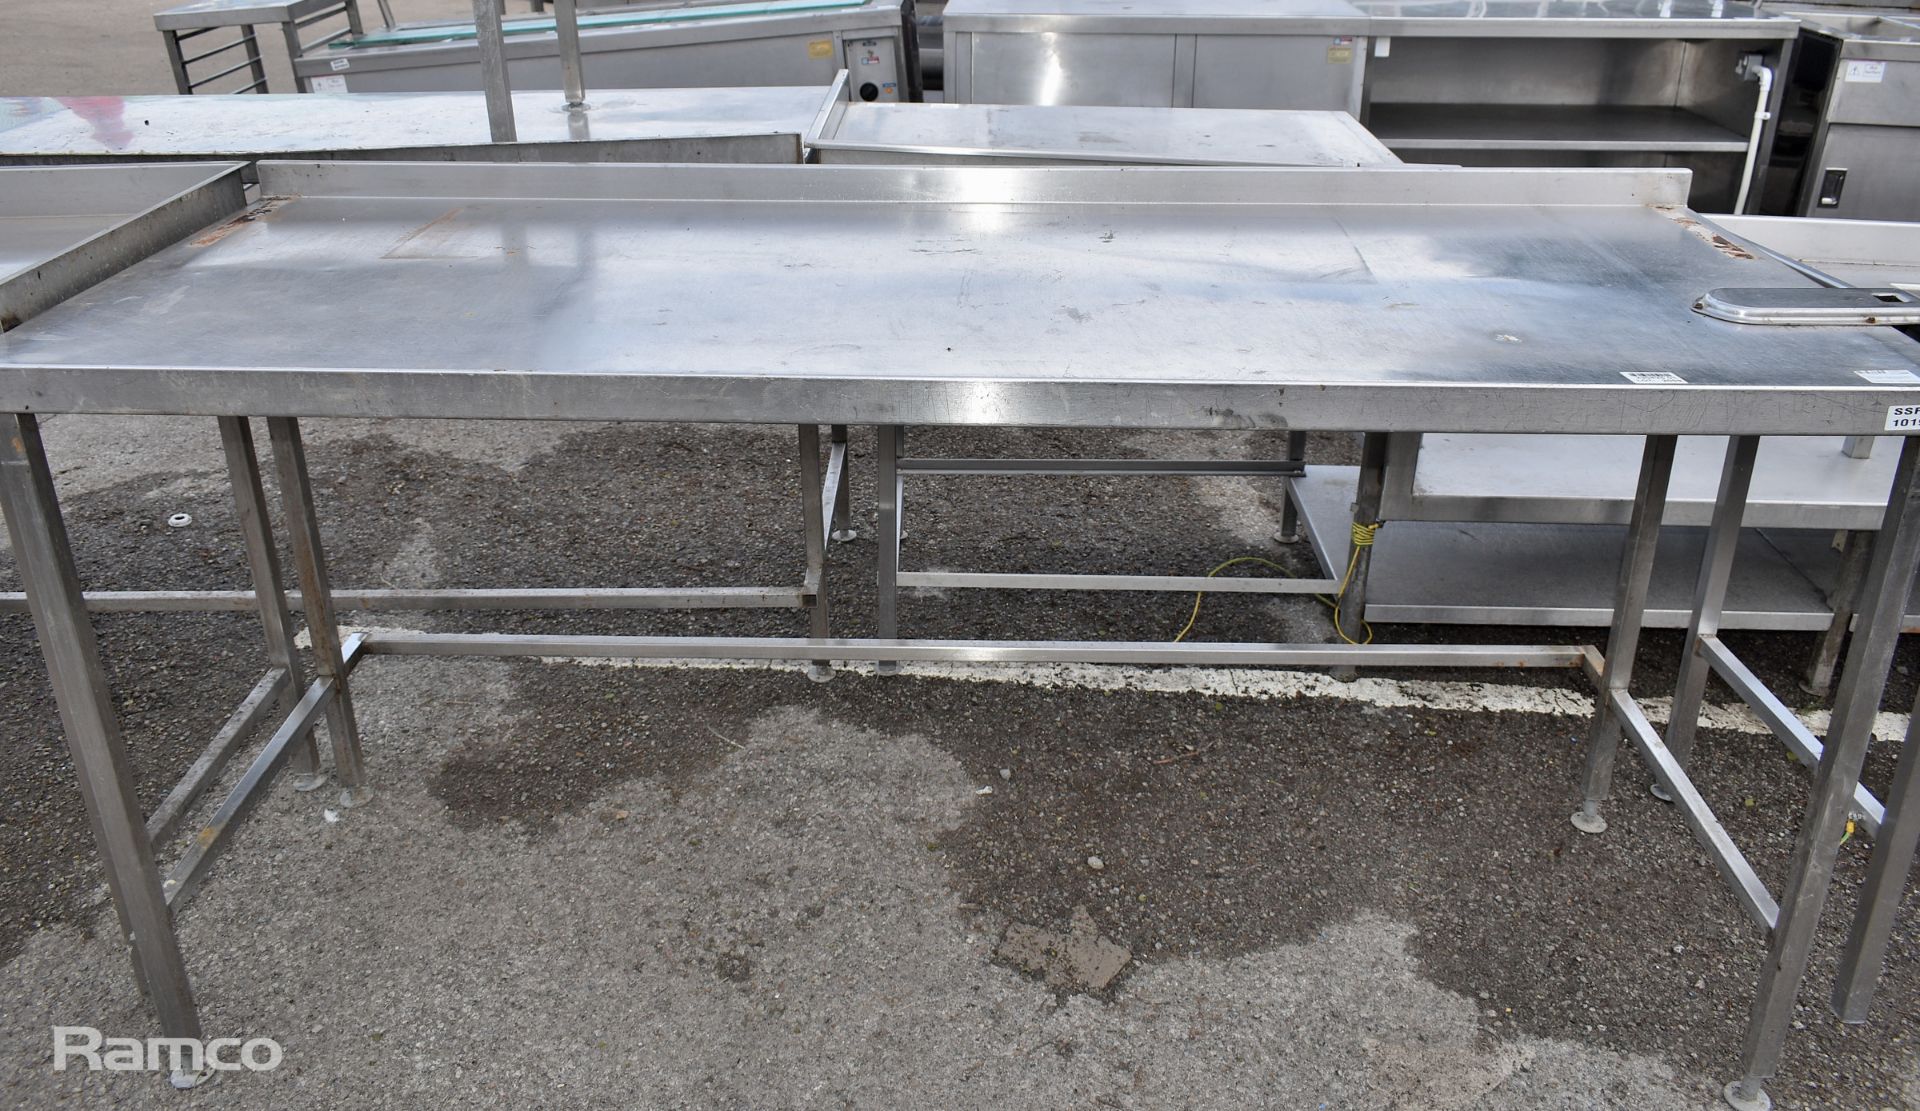 Stainless steel preparation table - 196 x 73 x 97cm